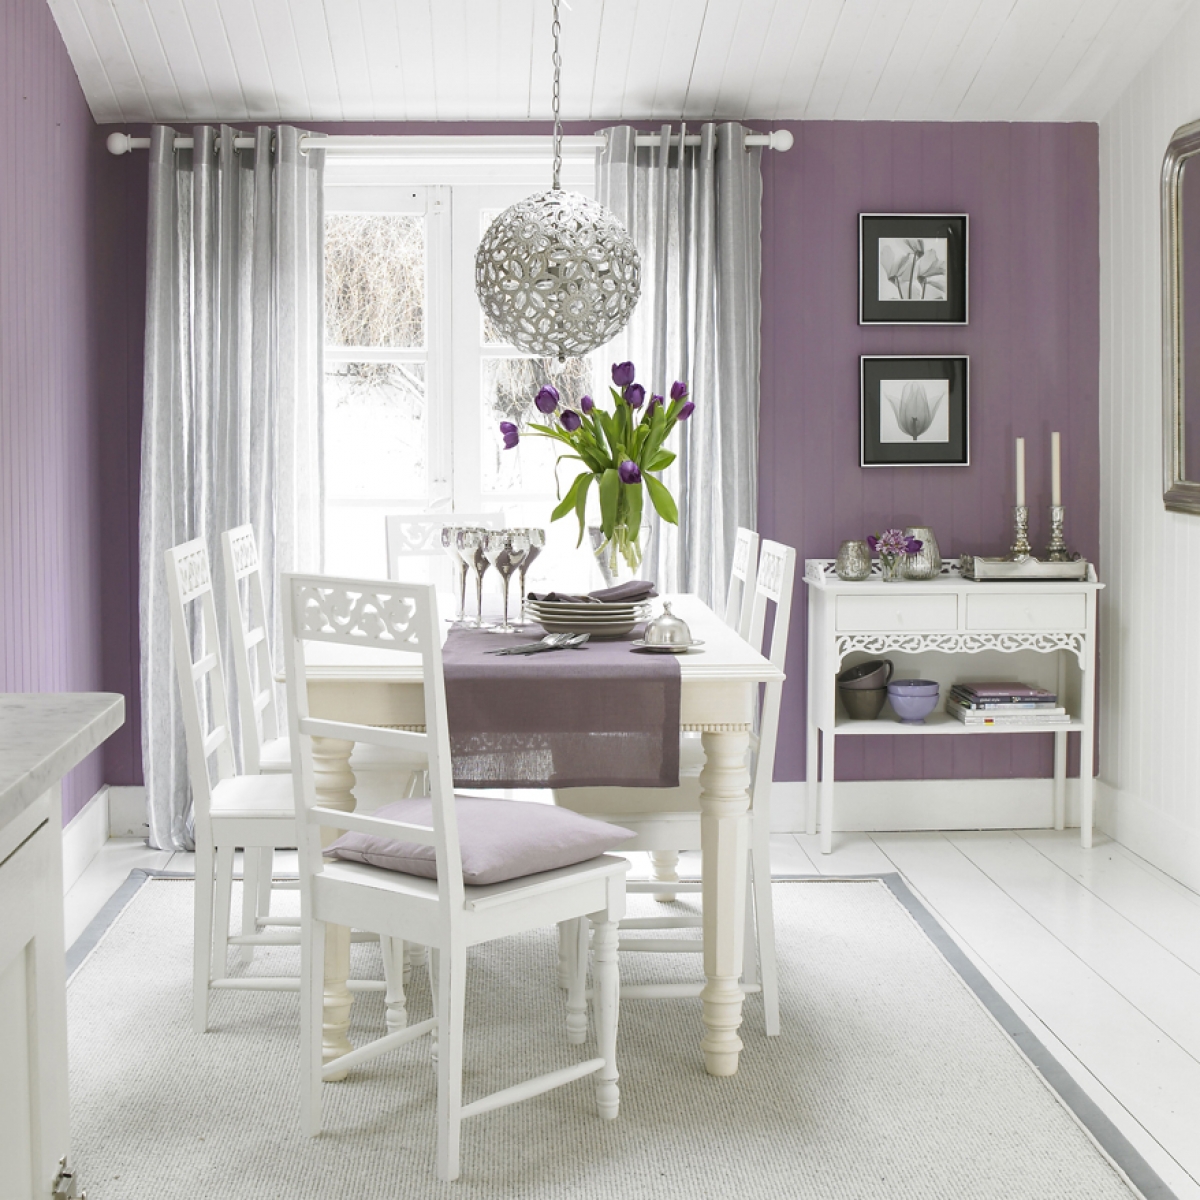 How Natural Light Effects Your The Colour Choice For Your Scheme